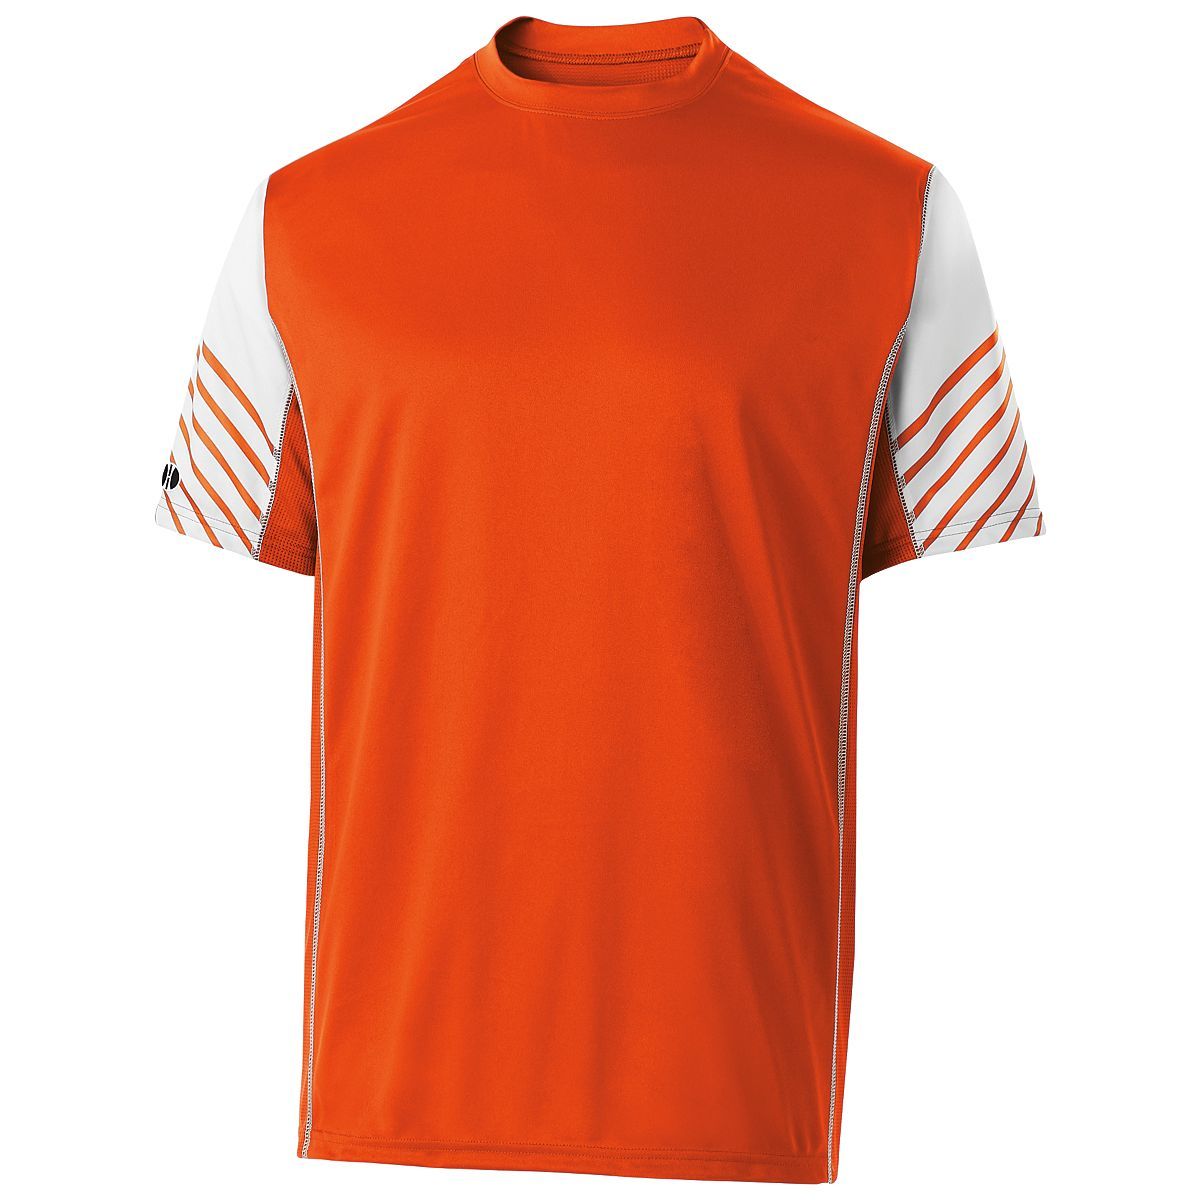 Holloway Arc Short Sleeve Tee in Orange/White  -Part of the Adult, Adult-Tee-Shirt, T-Shirts, Holloway, Shirts product lines at KanaleyCreations.com